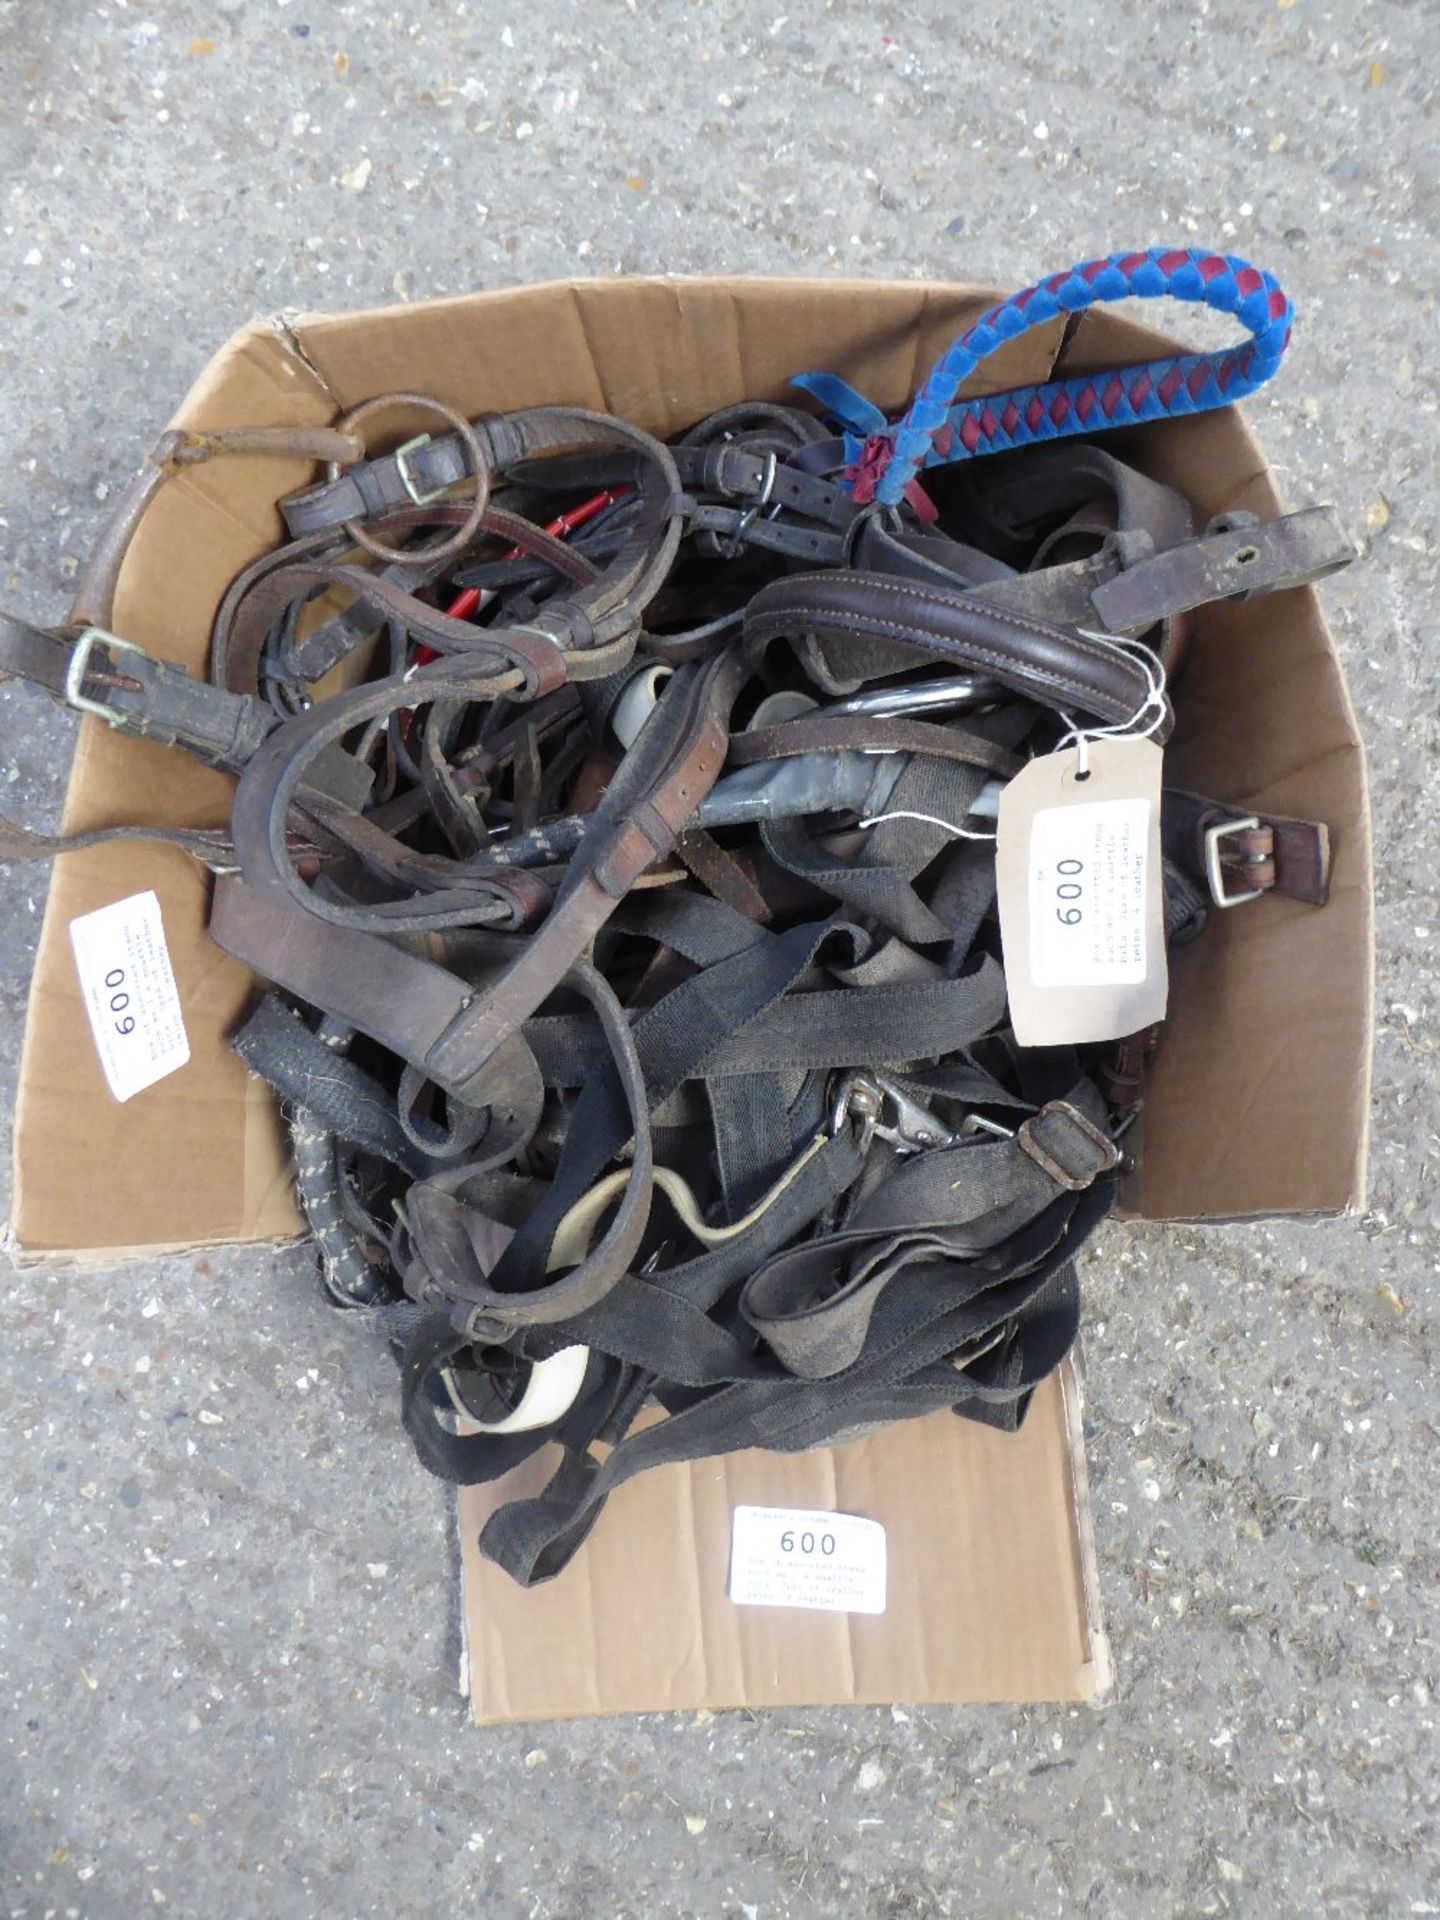 Box of assorted items such as 2 x snaffle bits, 3prs of leather reins, 4 leather bridles - one for a